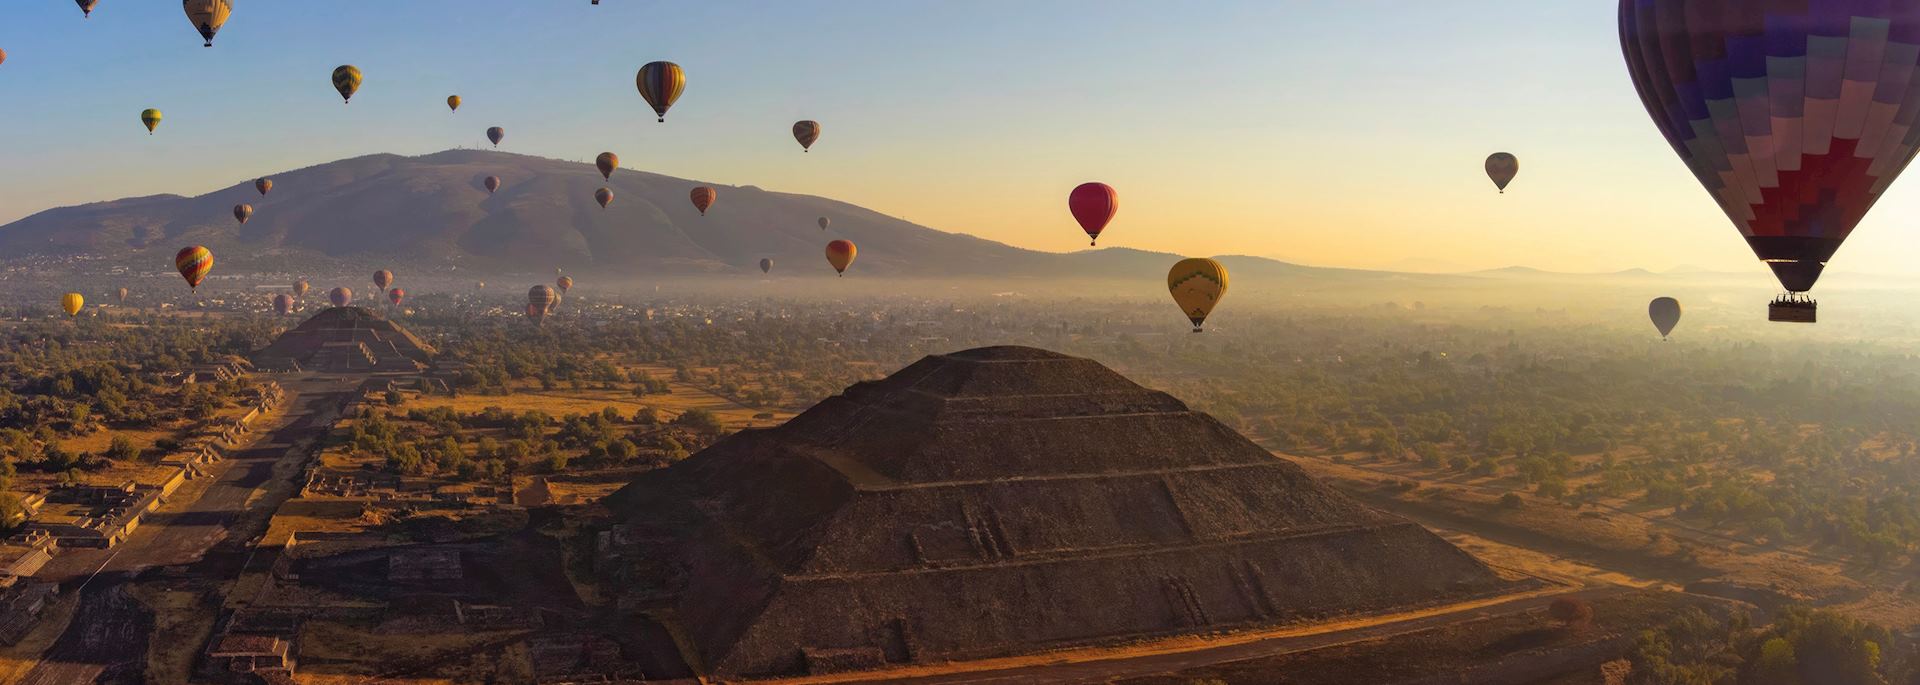 Hot air balloons over Teotihuacán